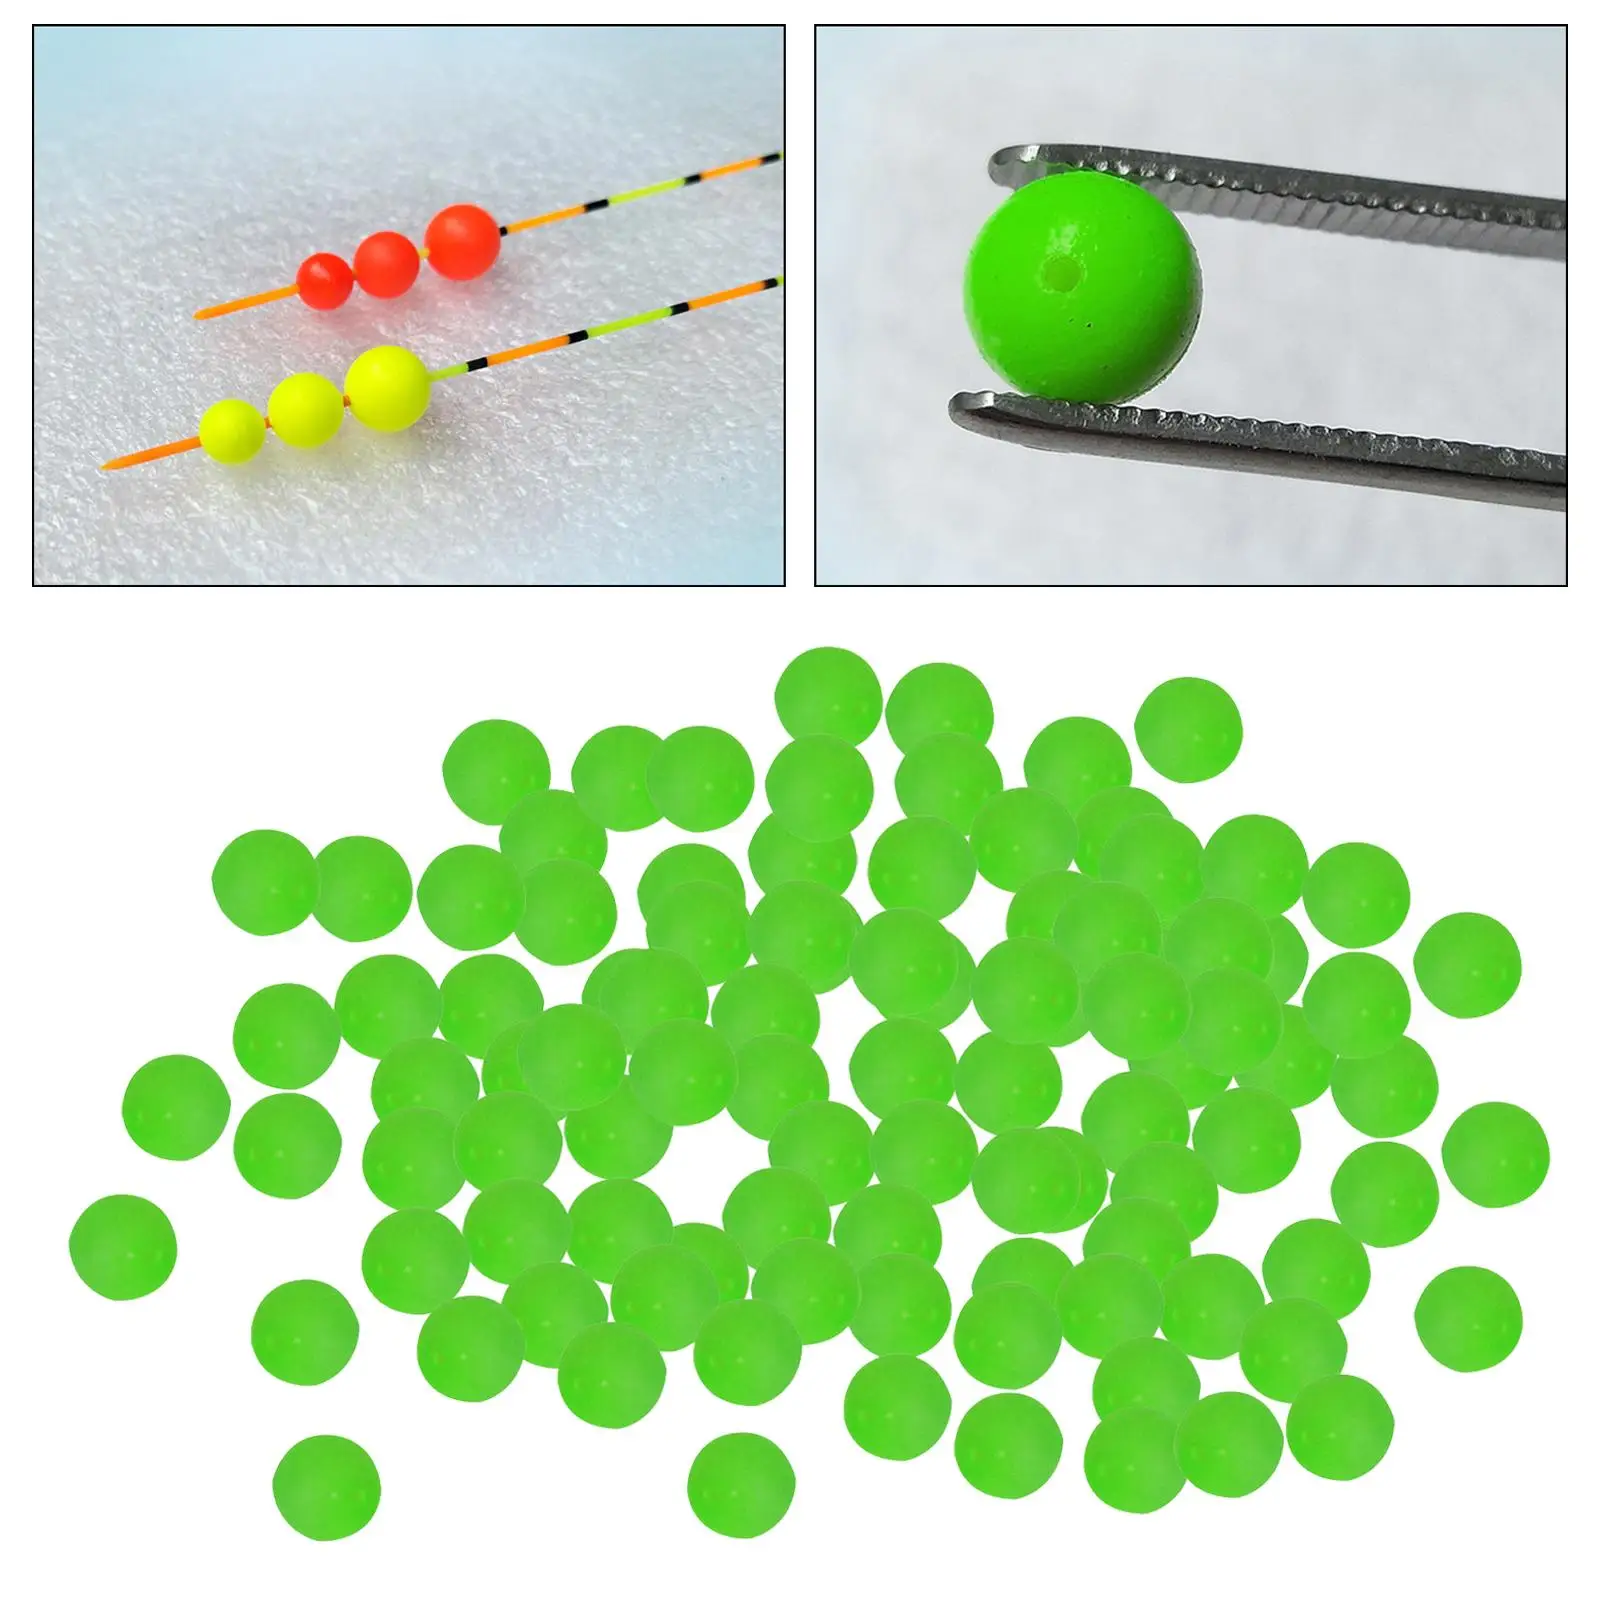 100 Pieces Fishing Floating Bobber Fishing Bobbers Bright Color Fishing Accessories Foam Strike Indicator Bite Fishing Float